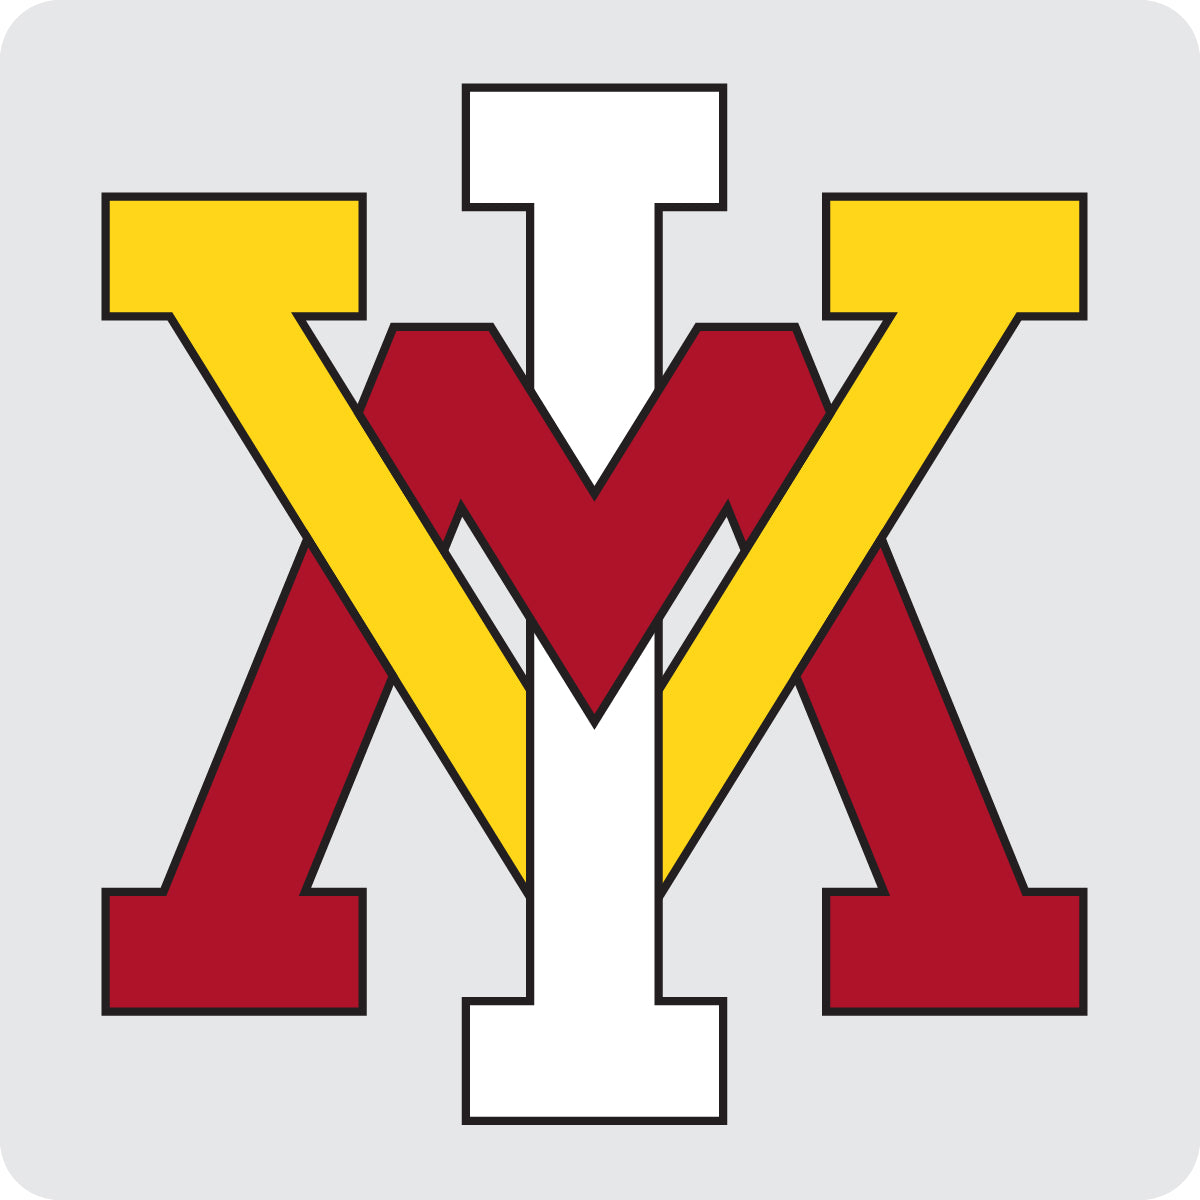 VMI Keydets Coasters Choice Of Marble Of Acrylic - Acrylic (4-Pack)